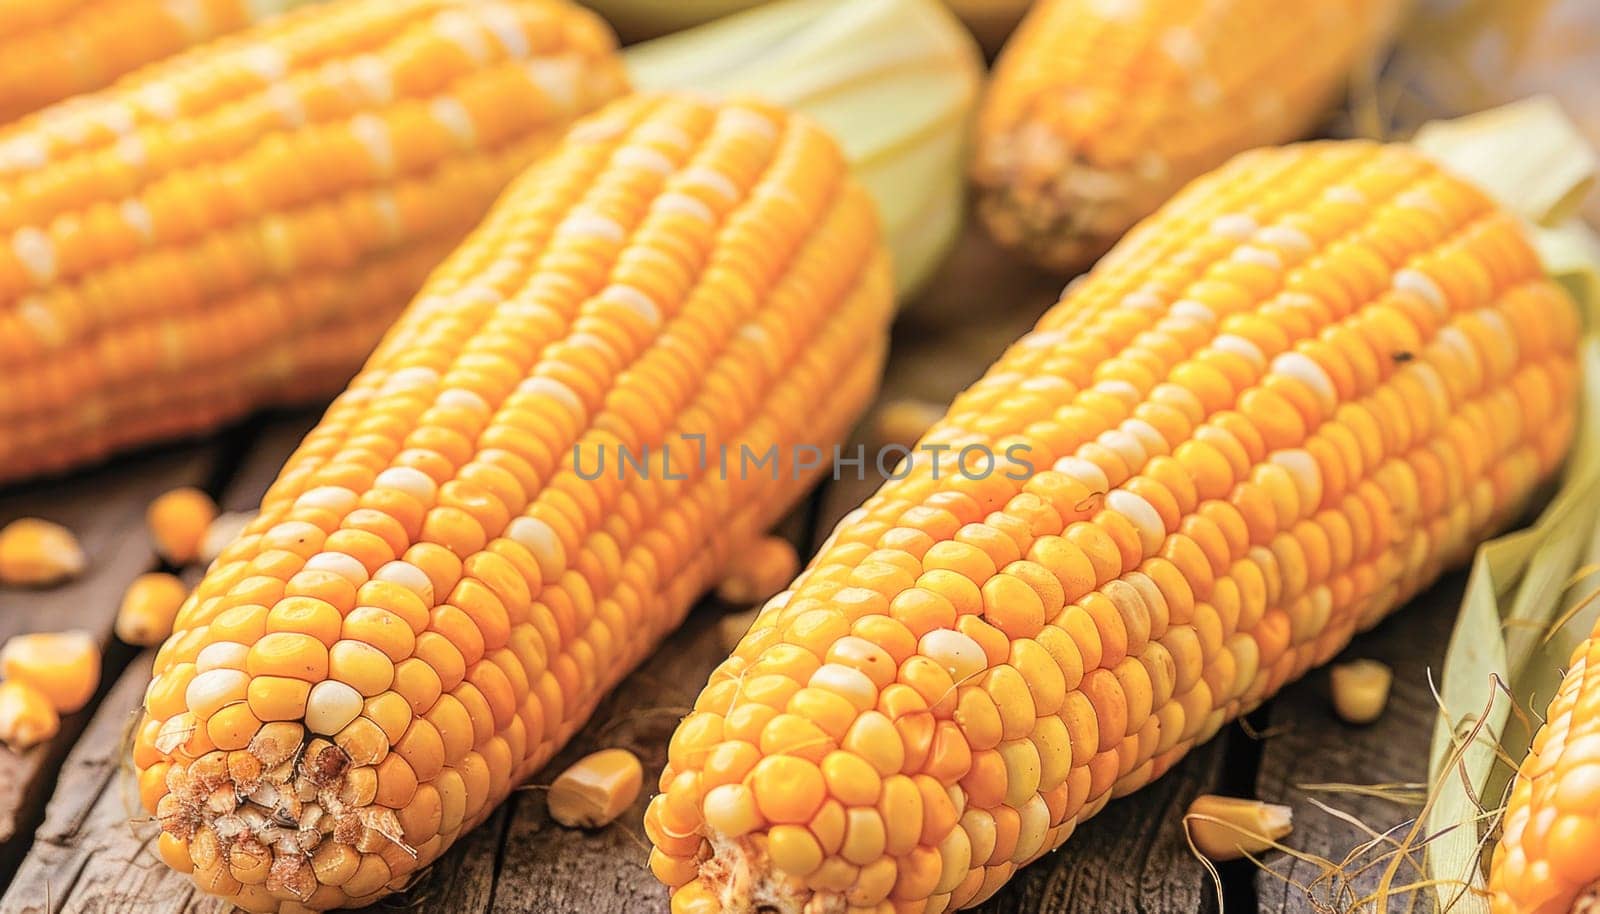 A piece of sweet corn on the cob is placed on a wooden table, displaying natural foods and ingredients